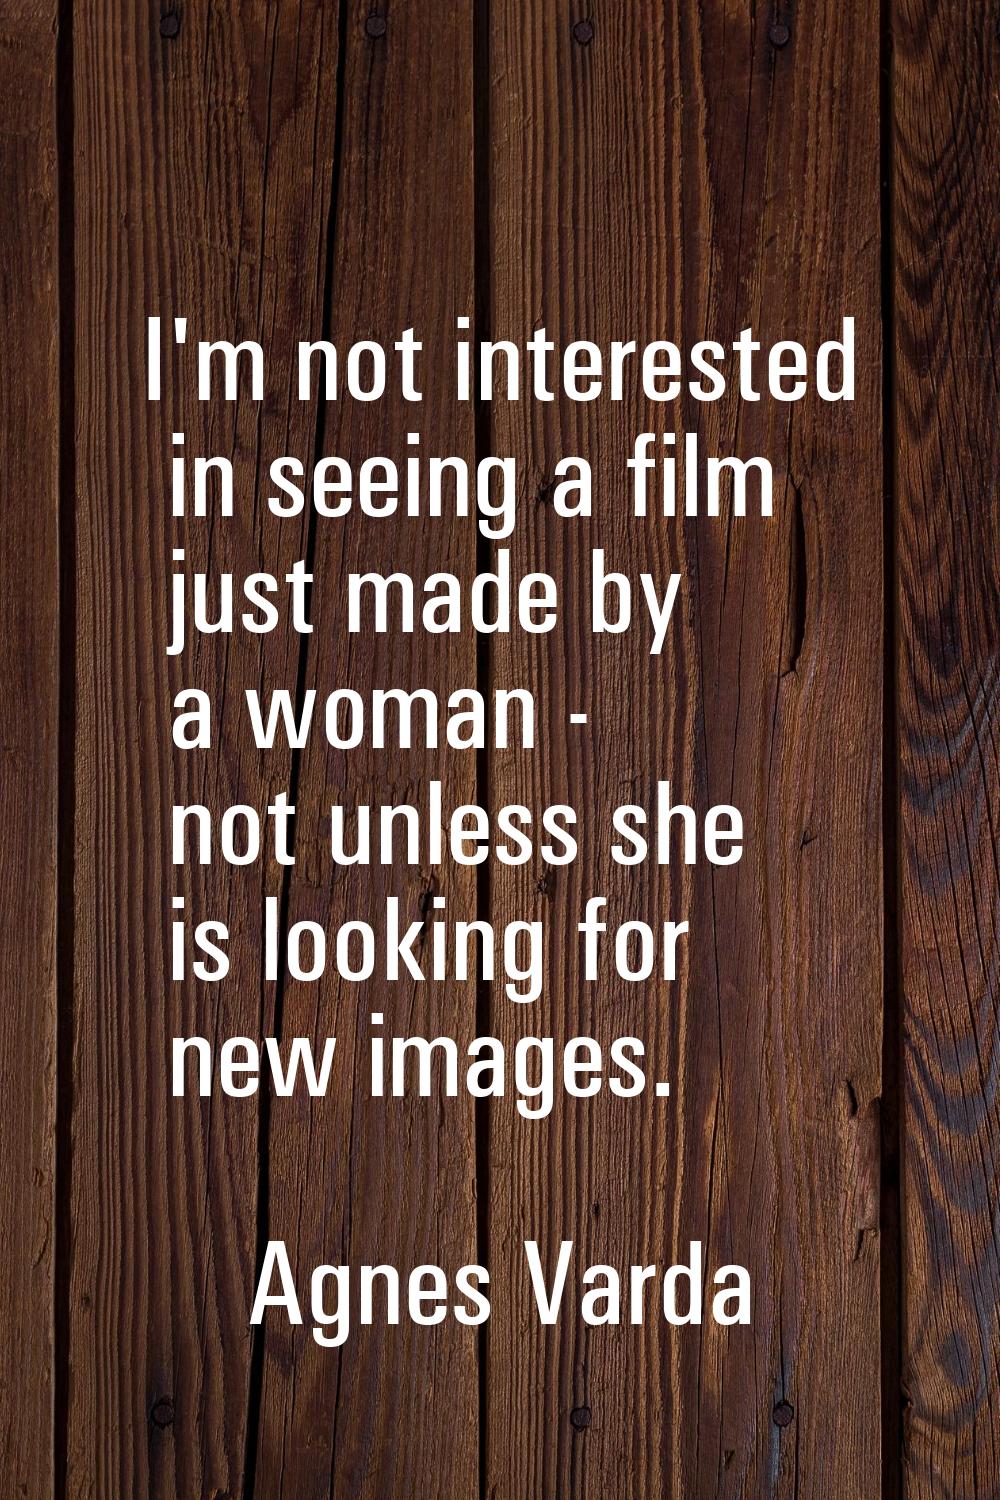 I'm not interested in seeing a film just made by a woman - not unless she is looking for new images